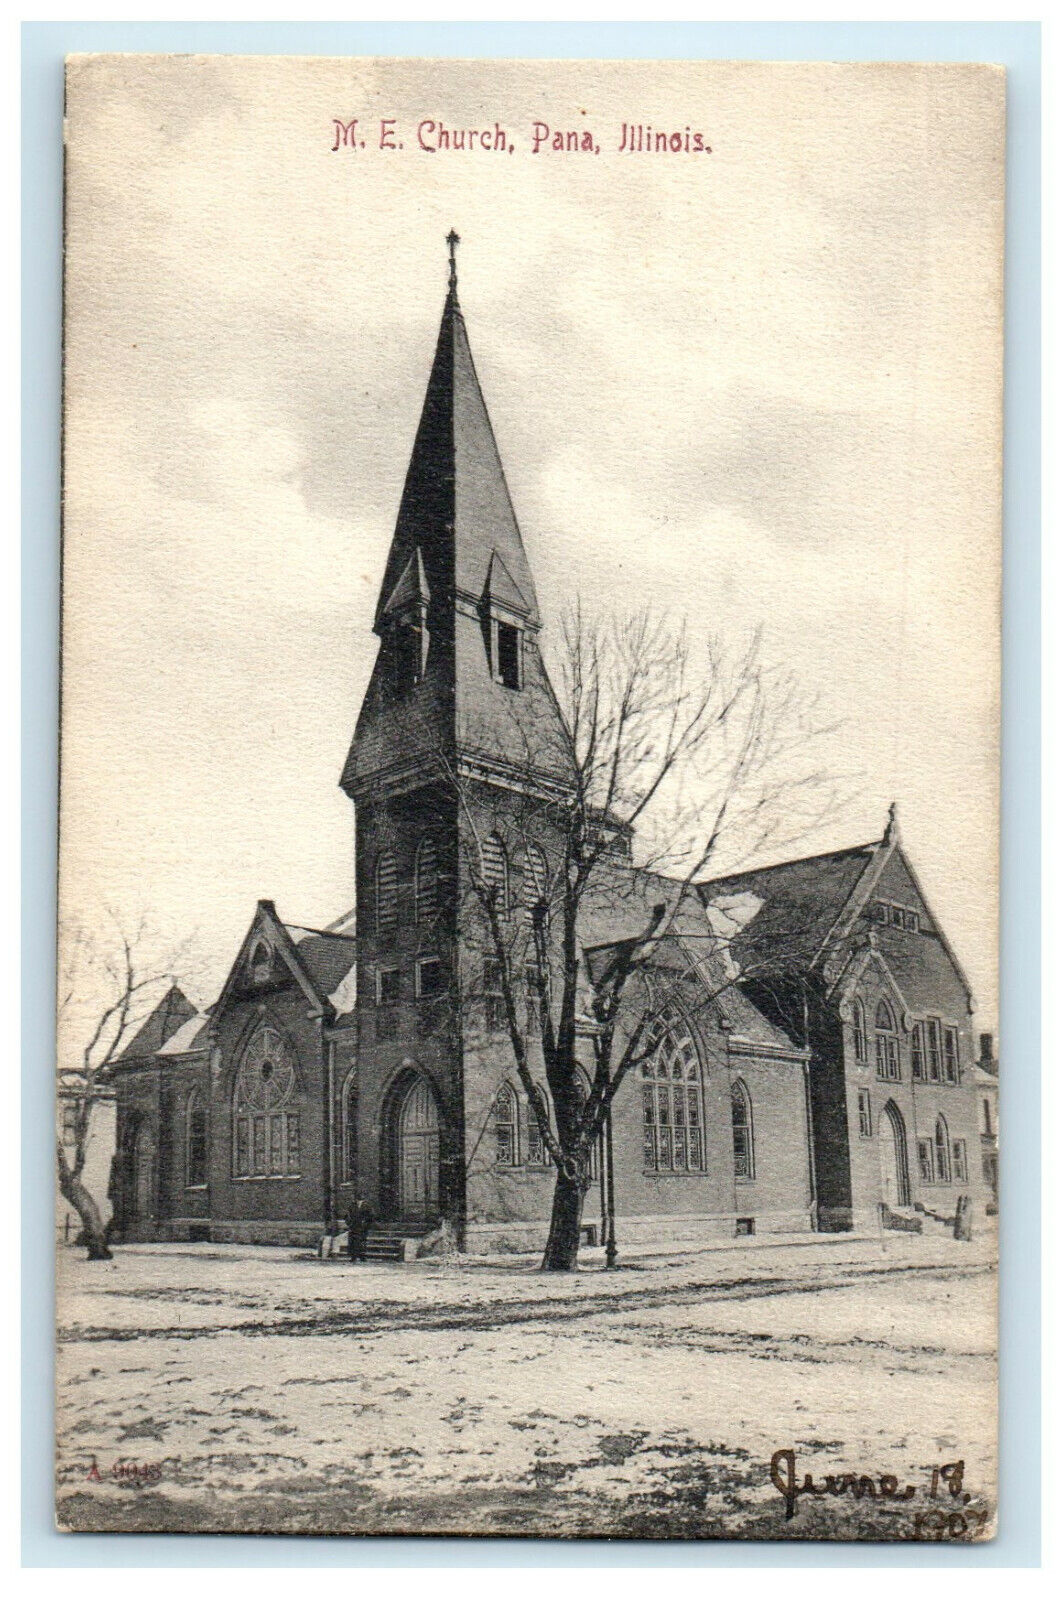 c1910s View of the M.E. Church Pana, Illinois IL Posted Antique Postcard